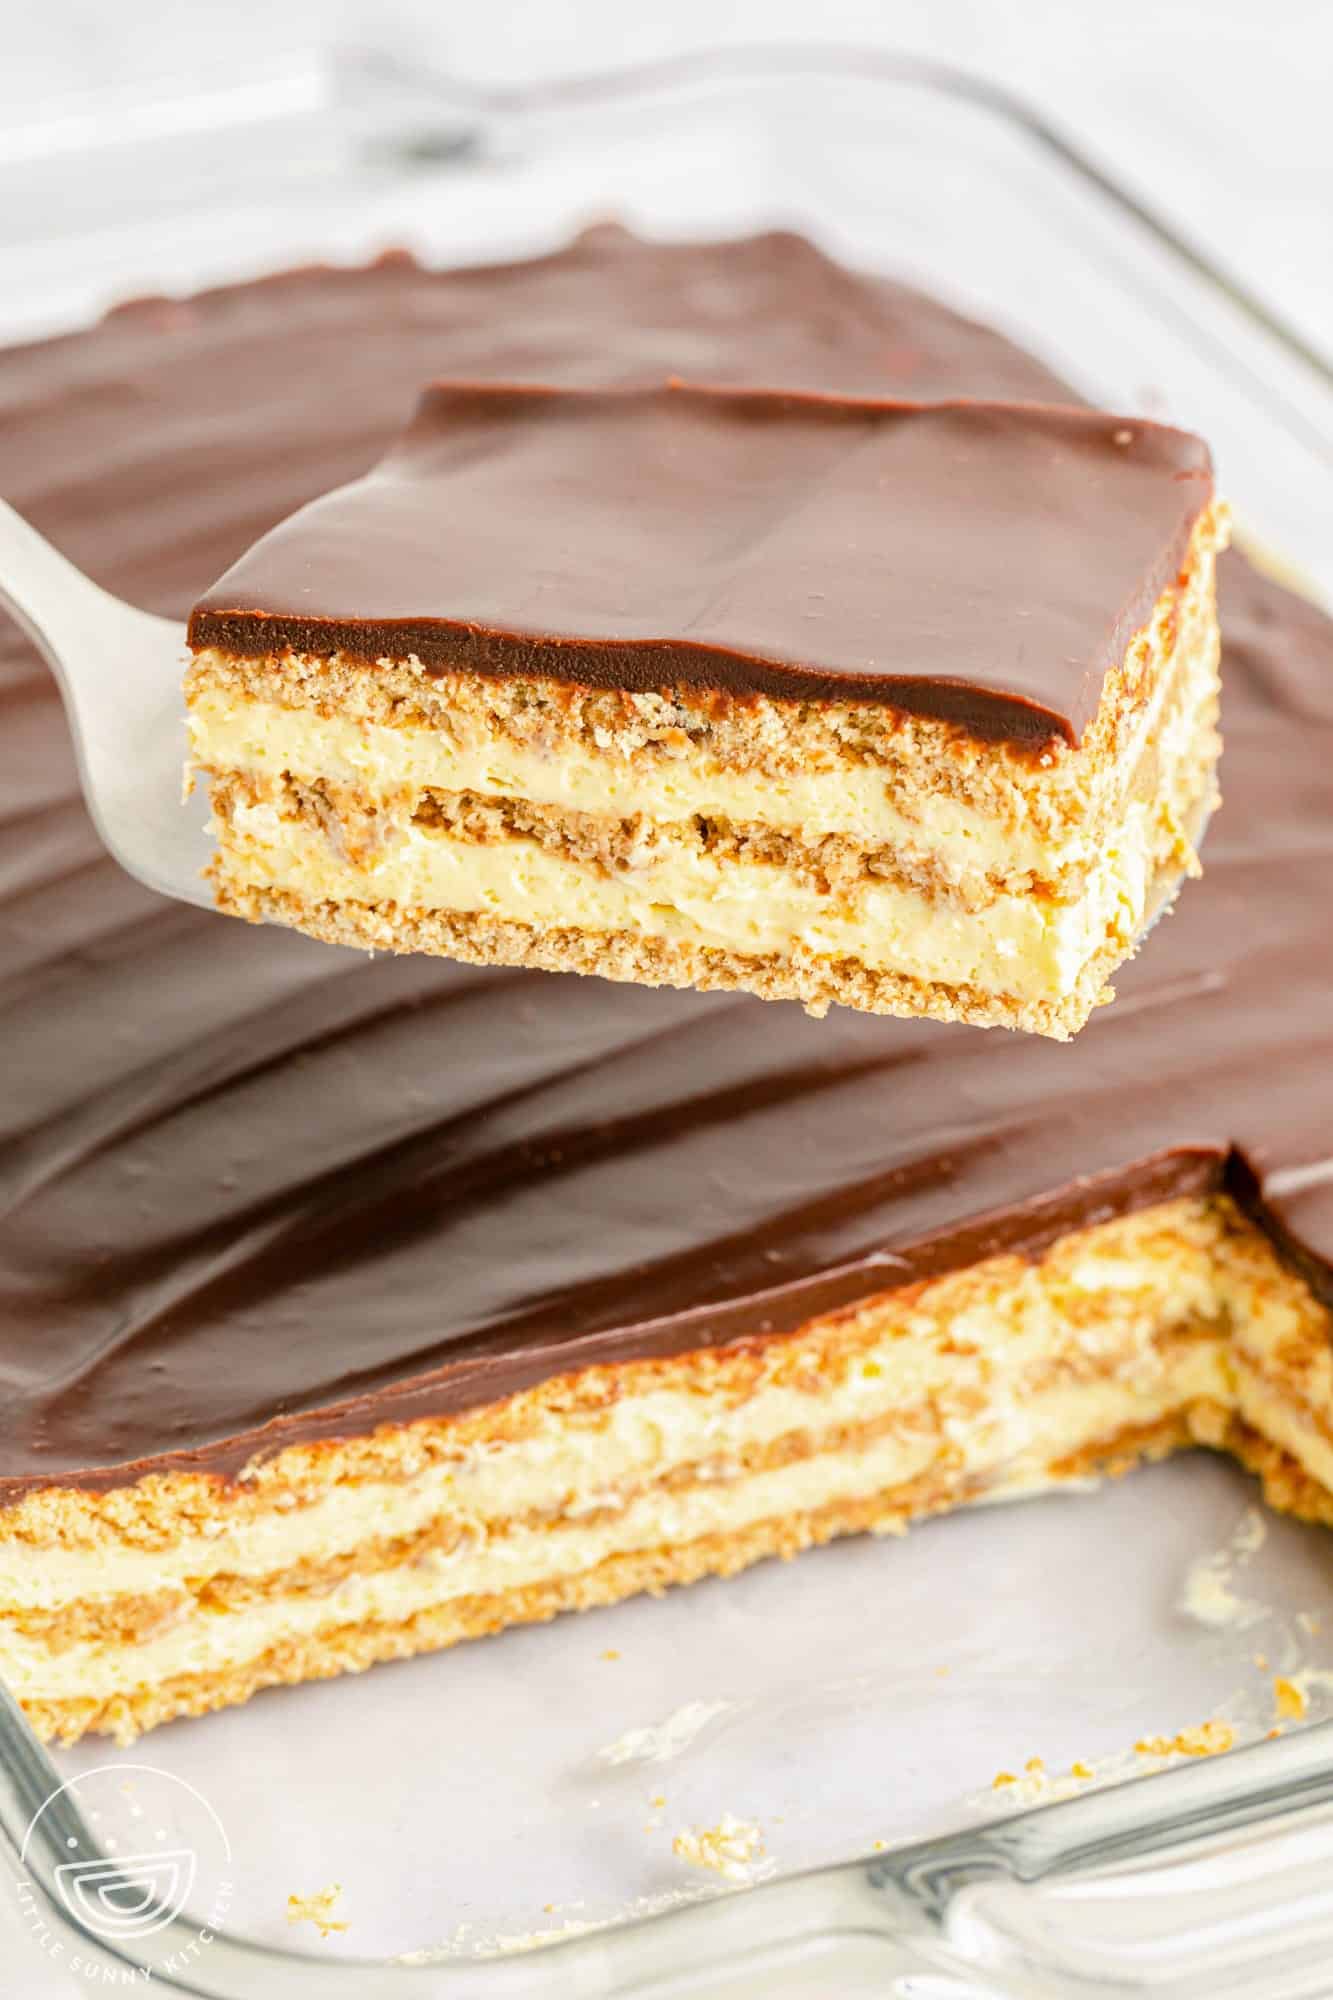 Taking a slice of no bake eclair cake from the pan, using a server